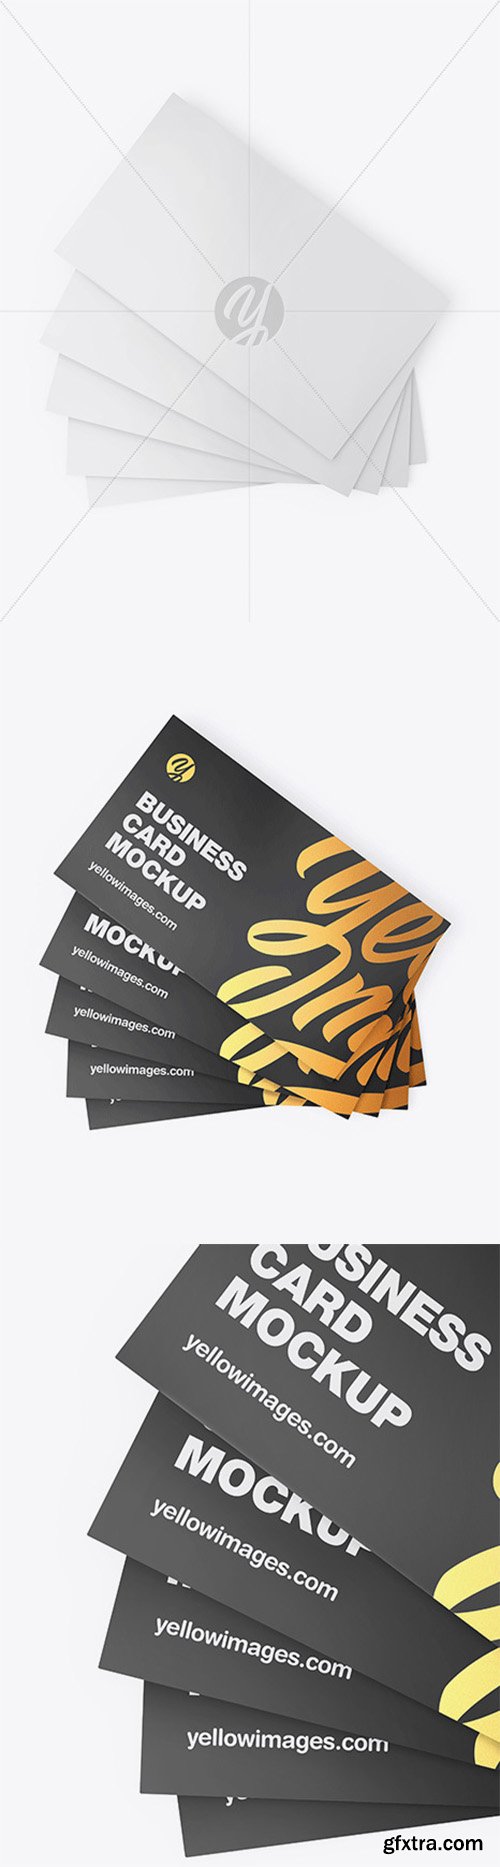 Download Business Cards Mockup 55237 Gfxtra PSD Mockup Templates